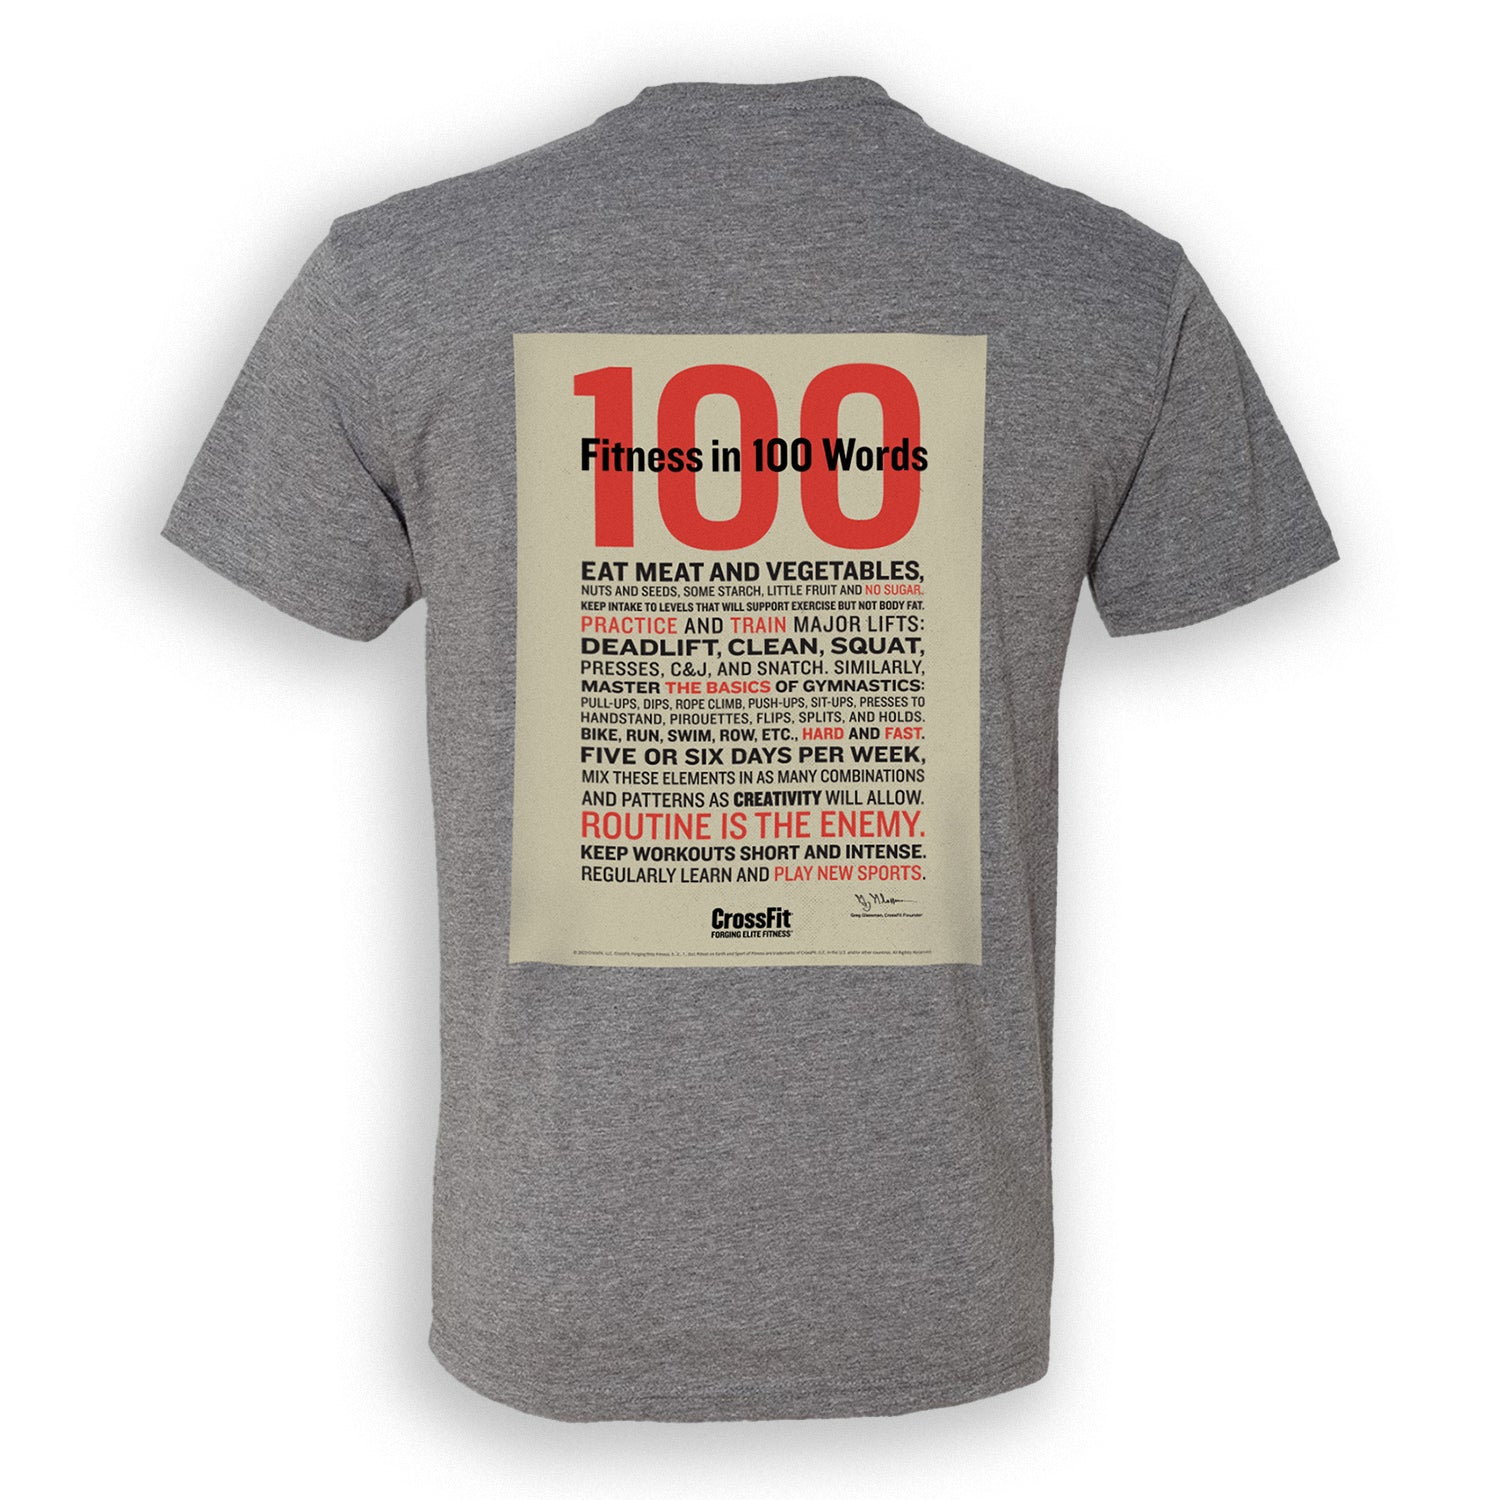 CrossFit Fitness in 100 Words T-shirt — Gray - back view